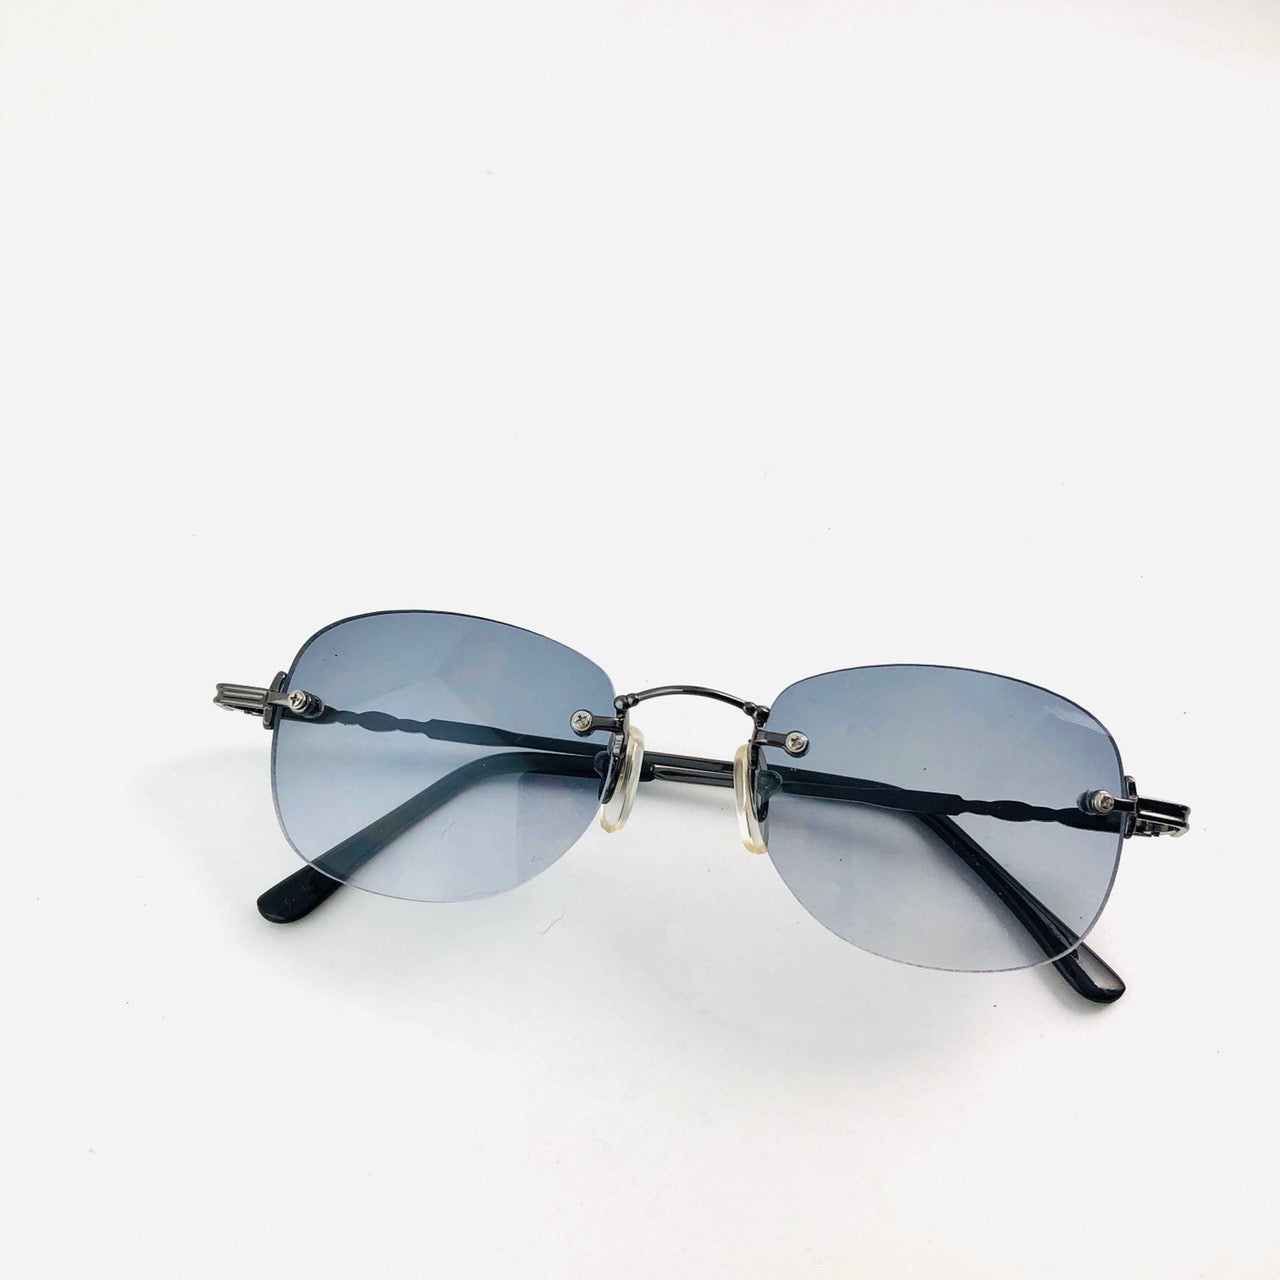 mod style, transparent lens, wire frame, deadstock sunglasses with chrome metal